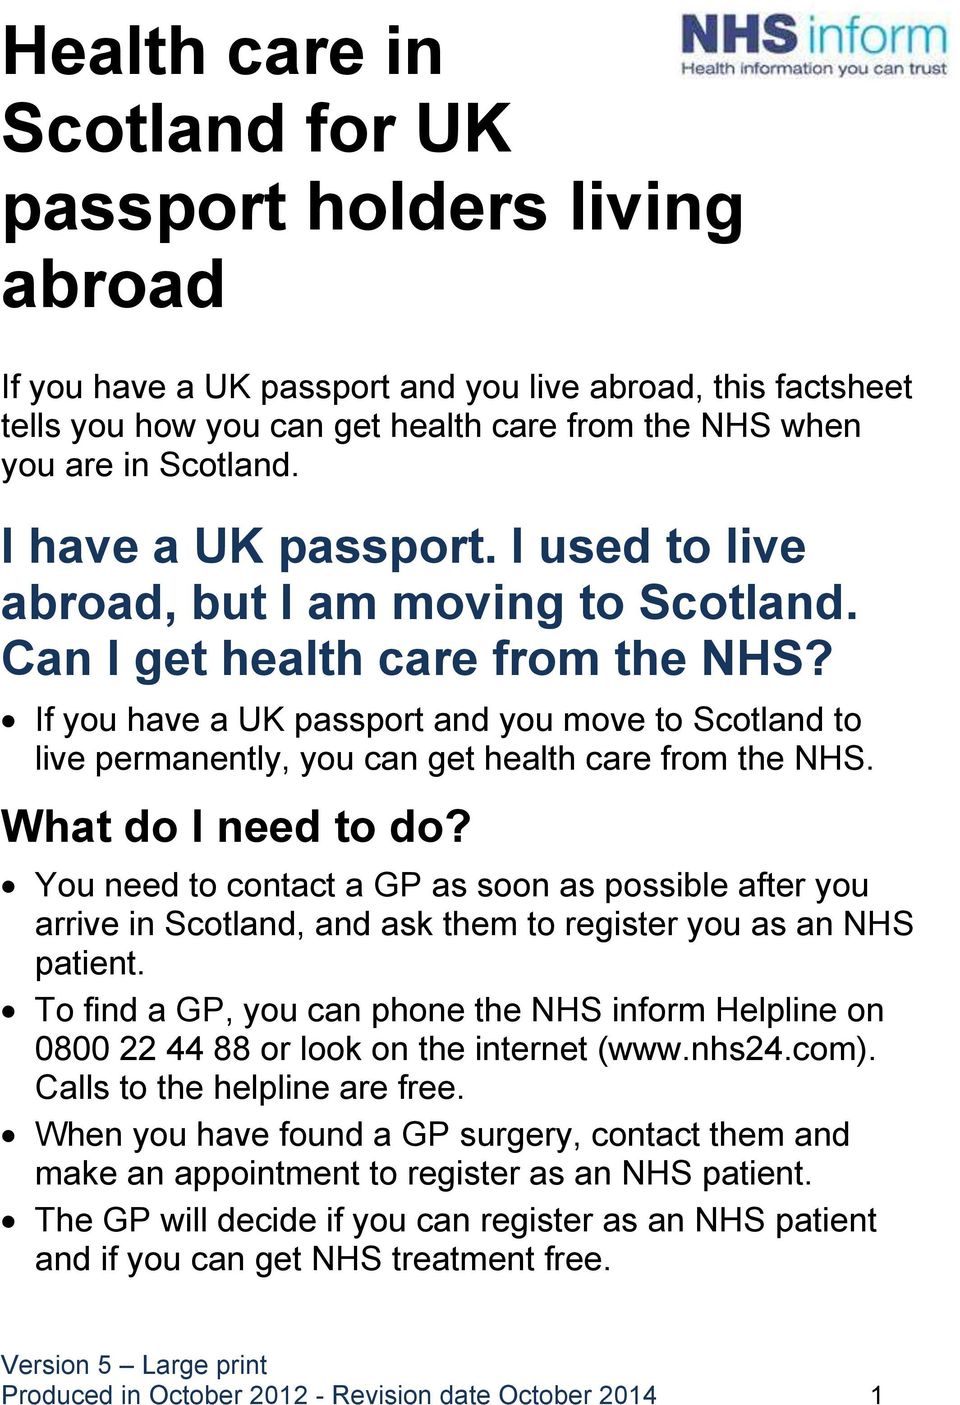 If you have a UK passport and you move to Scotland to live permanently, you can get health care from the NHS. What do I need to do?